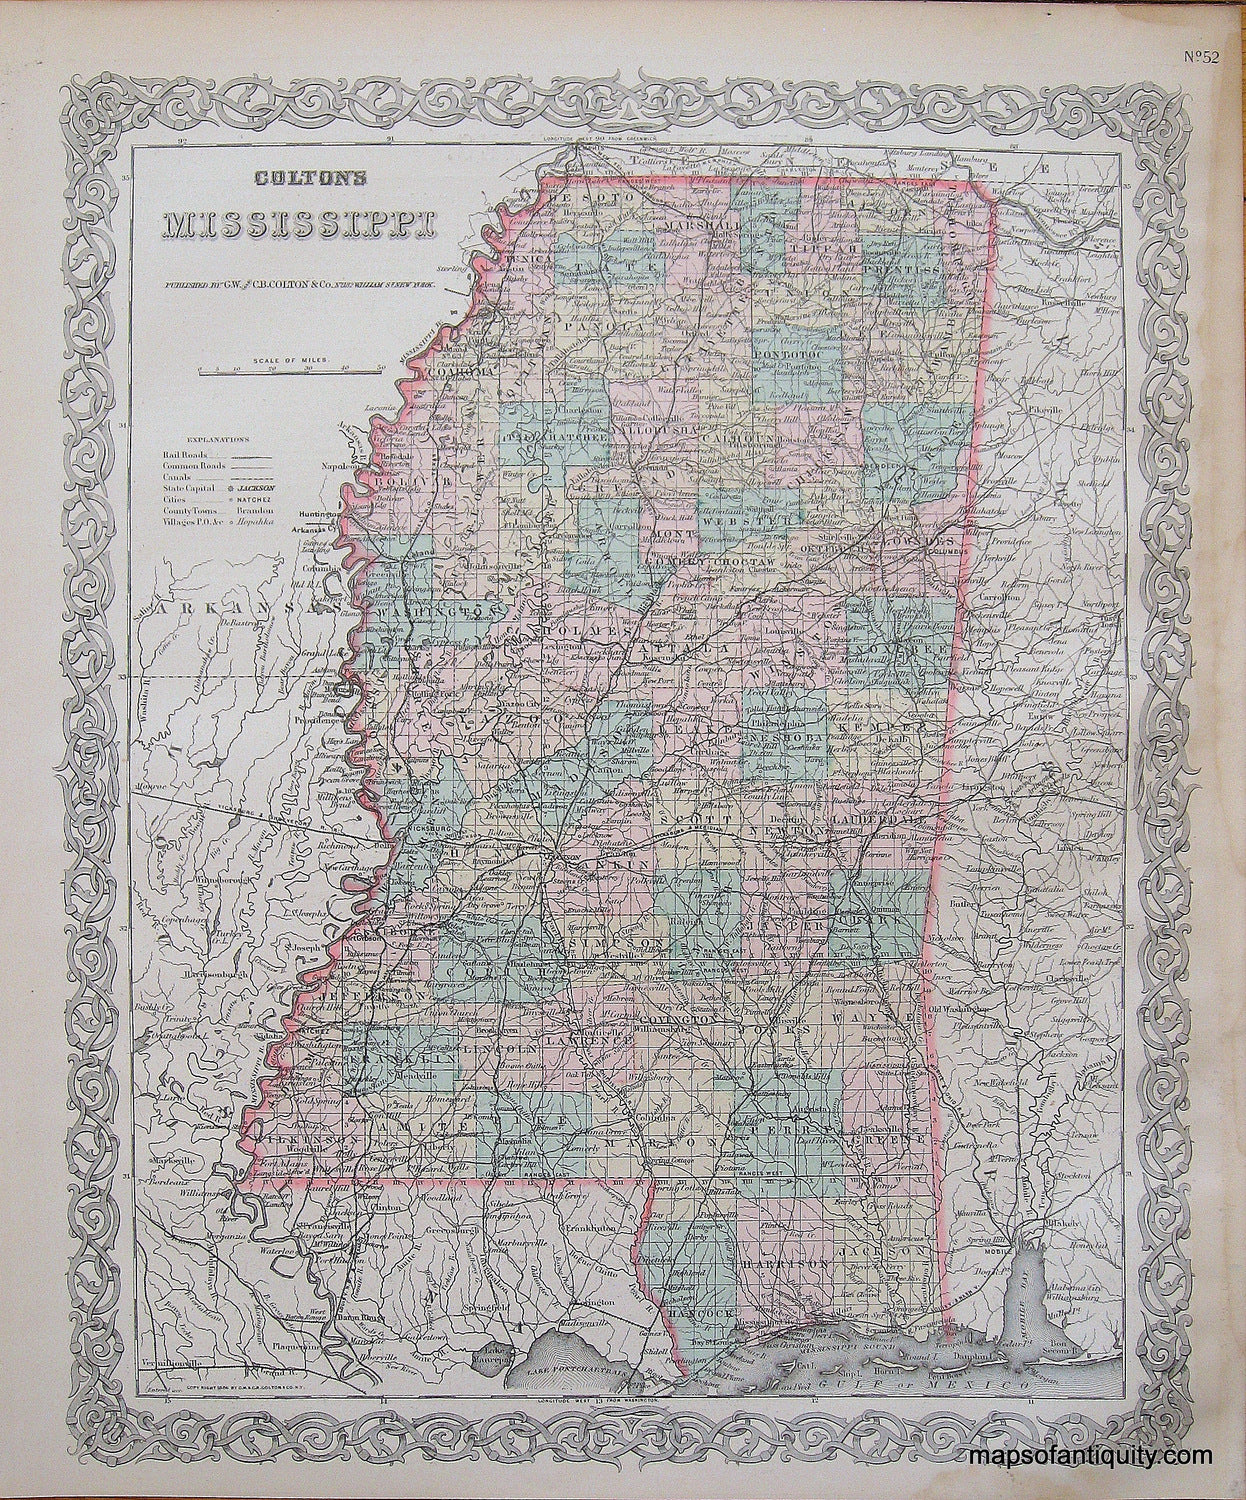 Antique-Hand-Colored-Map-Colton's-Mississippi-**********-United-States-Mississippi-1887-Colton-Maps-Of-Antiquity